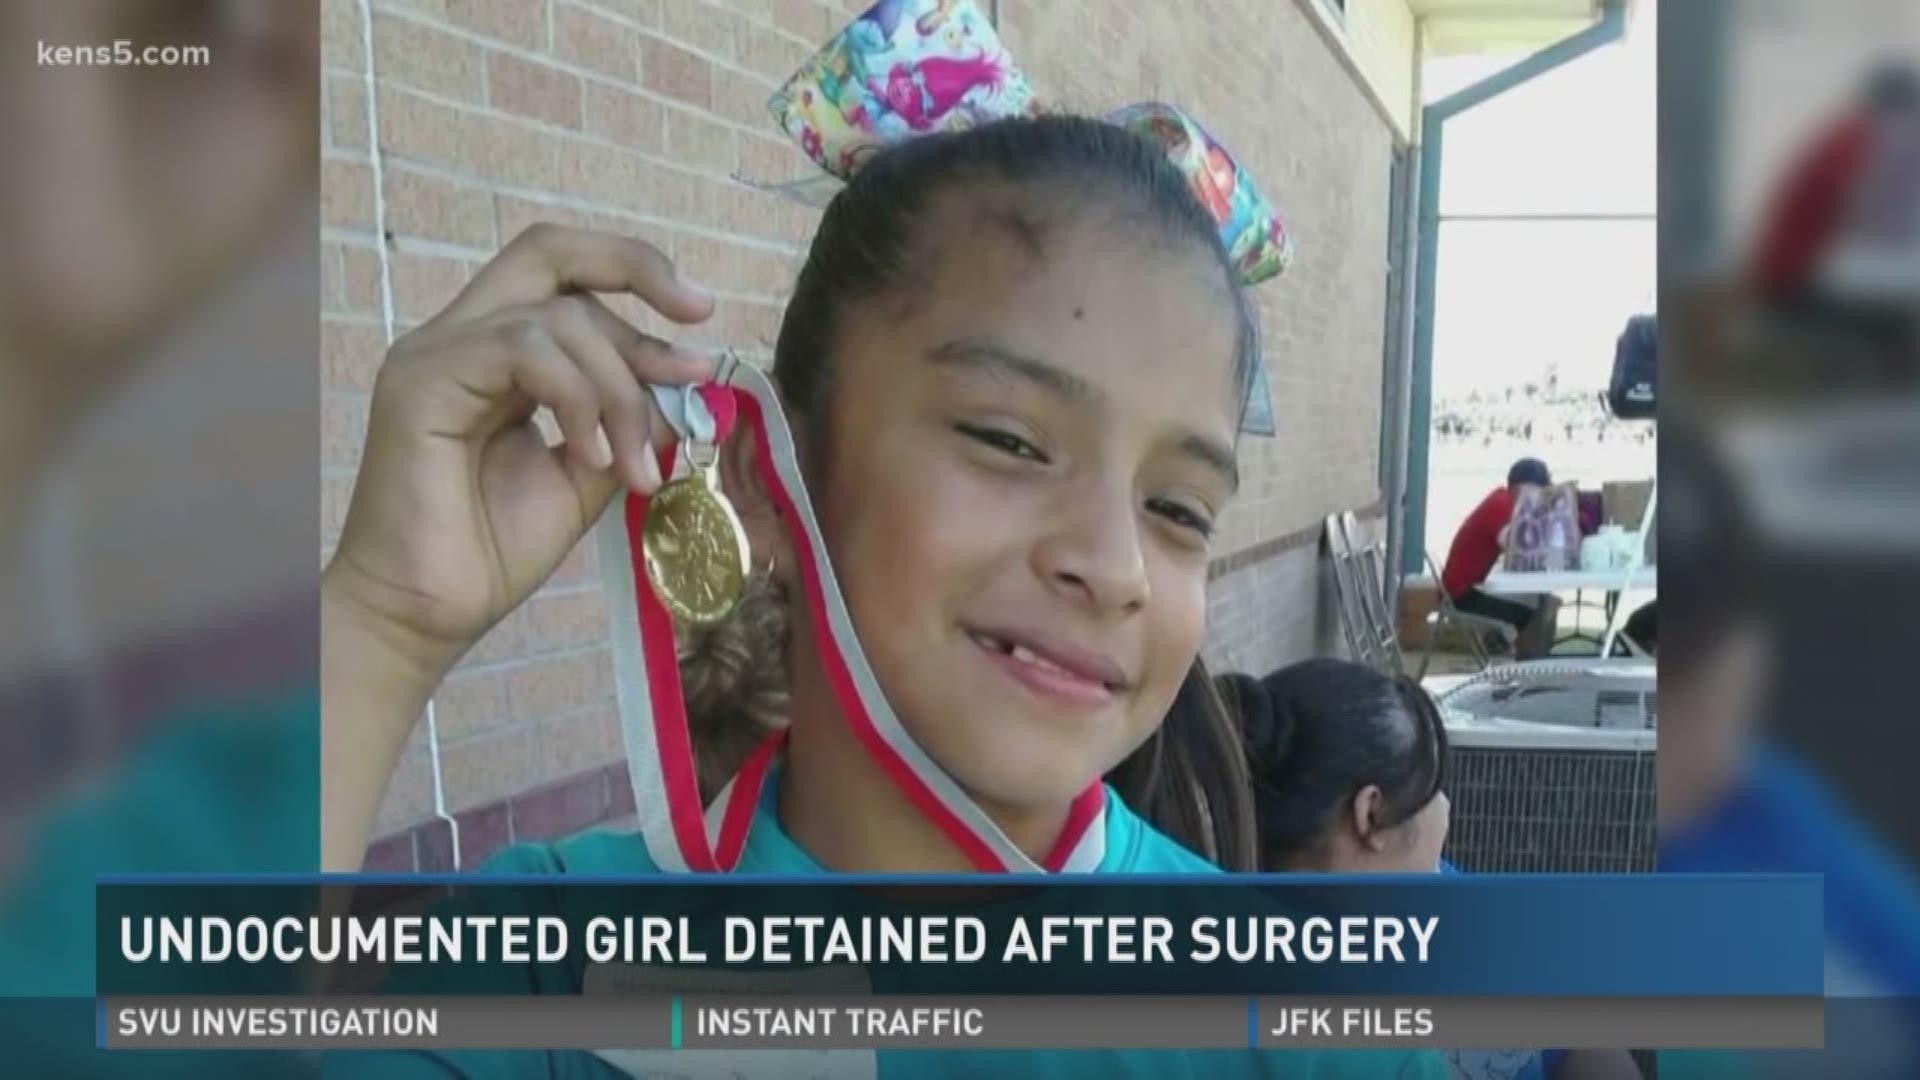 Immigration officials detained a 10-year-old girl with cerebral palsy after an emergency life-saving surgery.